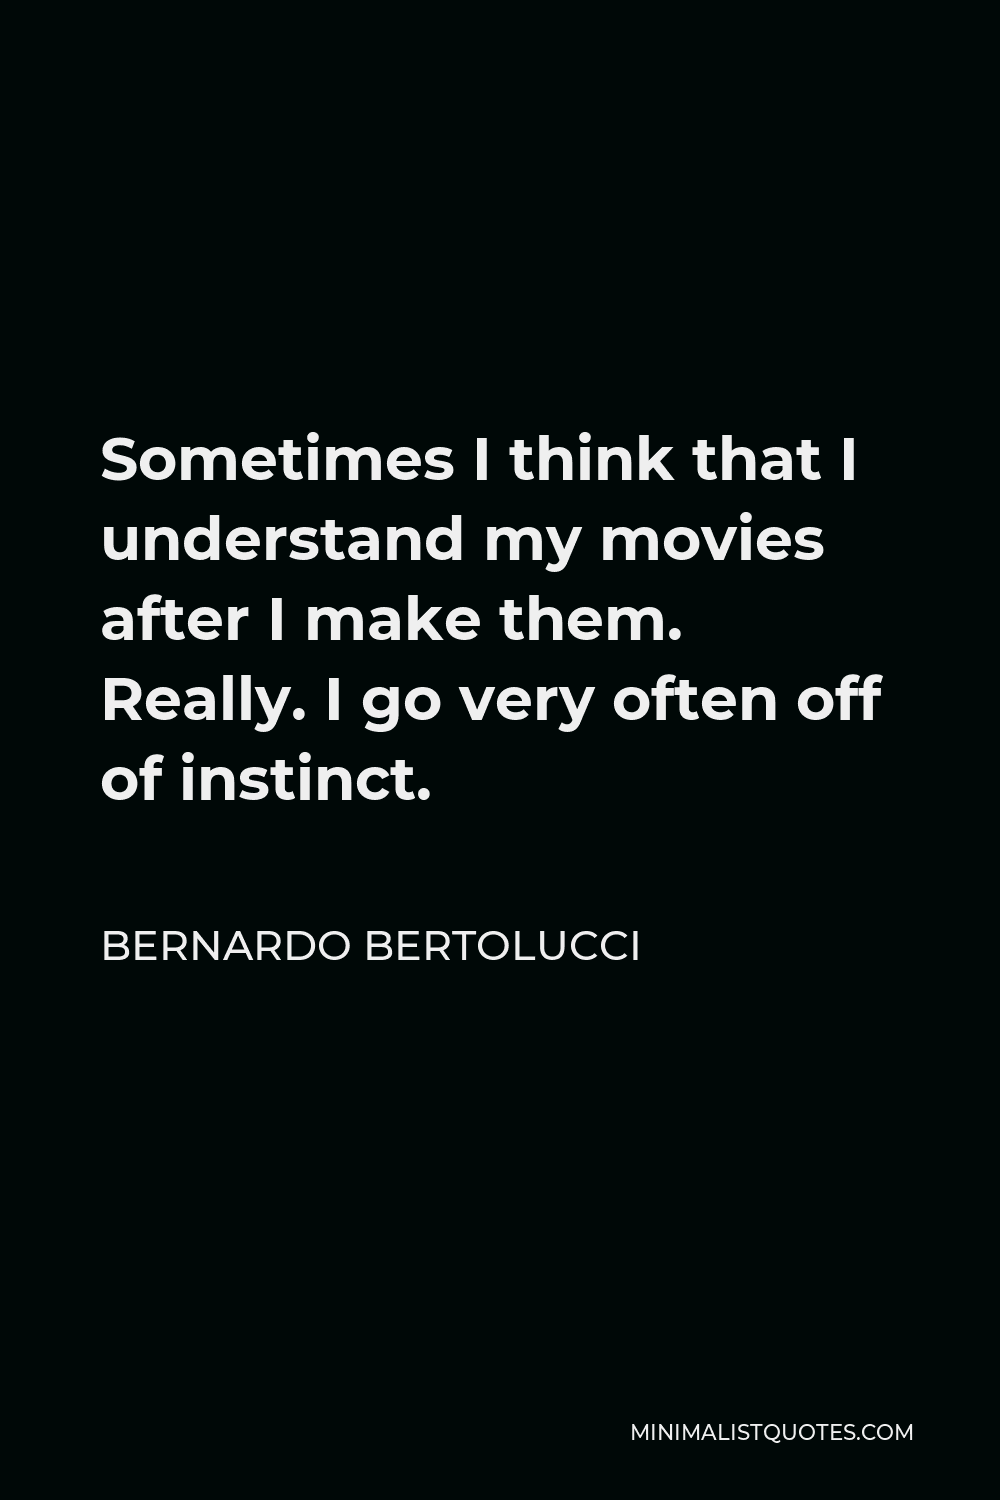 Bernardo Bertolucci Quote - Sometimes I think that I understand my movies after I make them. Really. I go very often off of instinct.